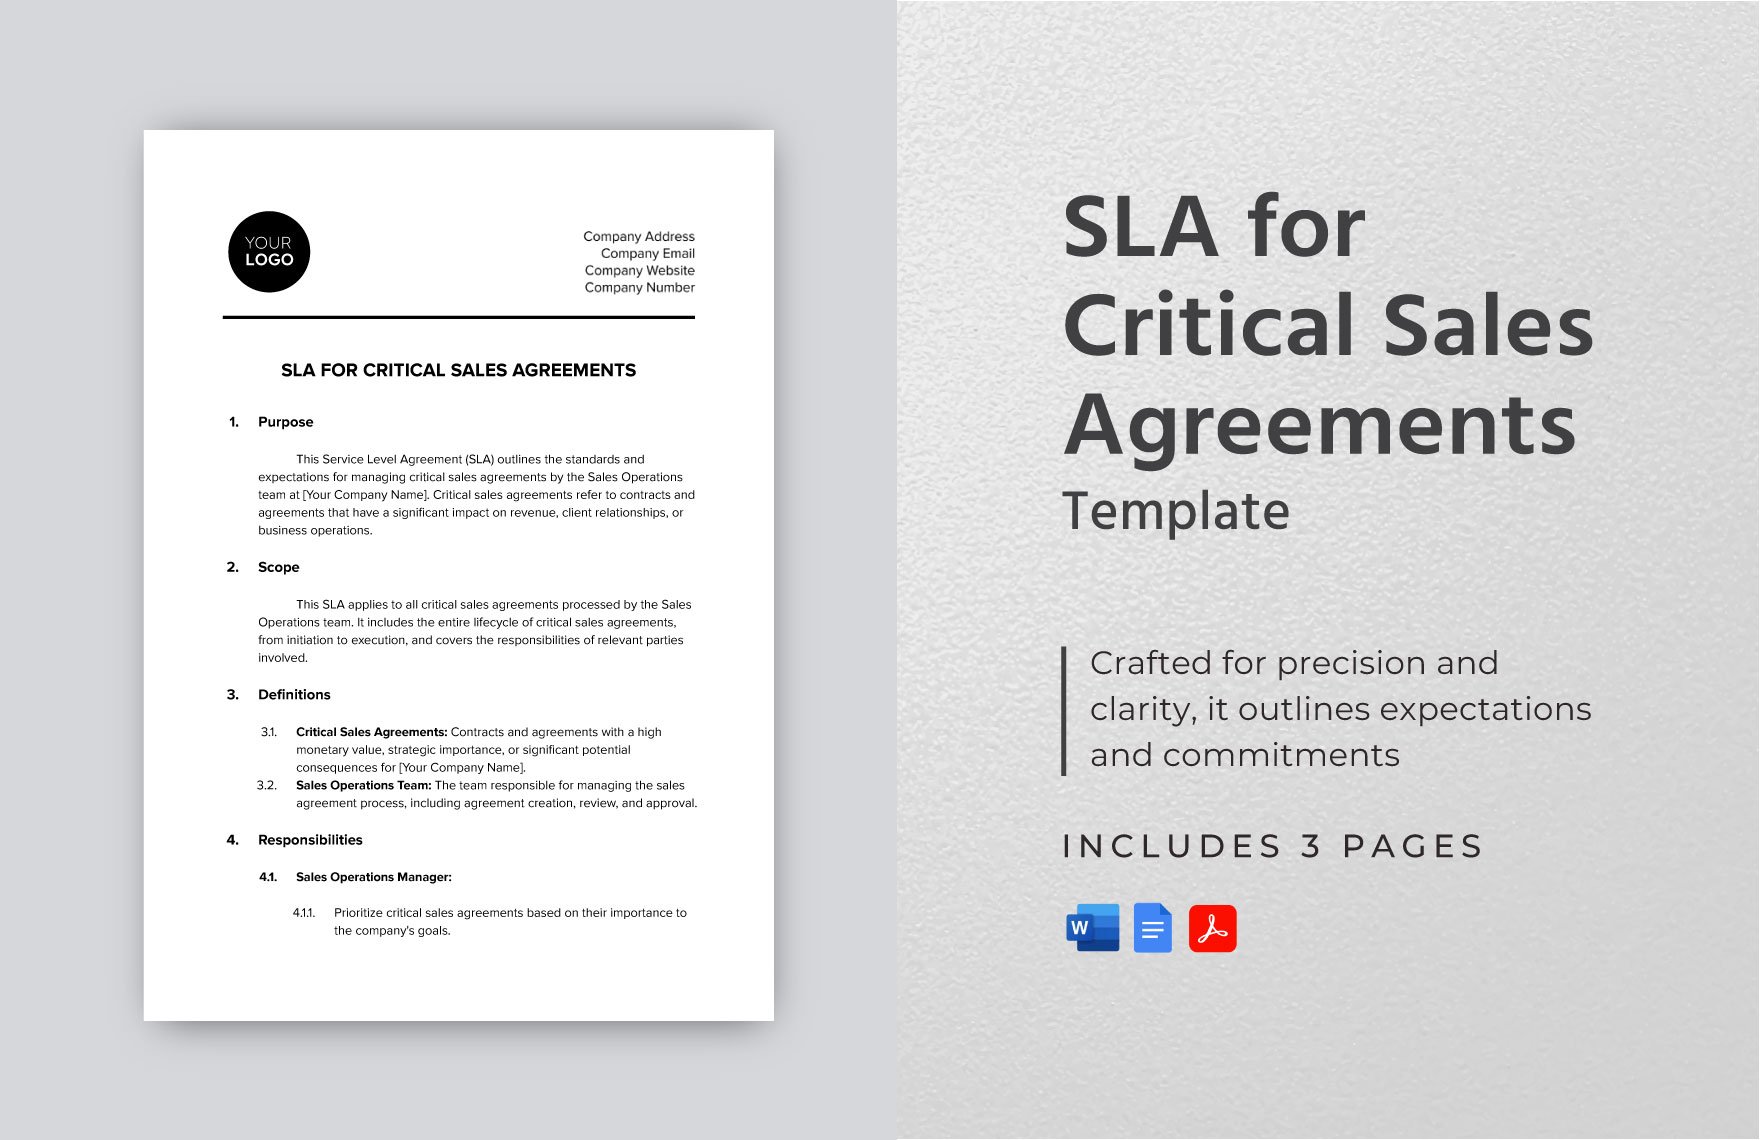 SLA for Critical Sales Agreements Template in Word, Google Docs, PDF